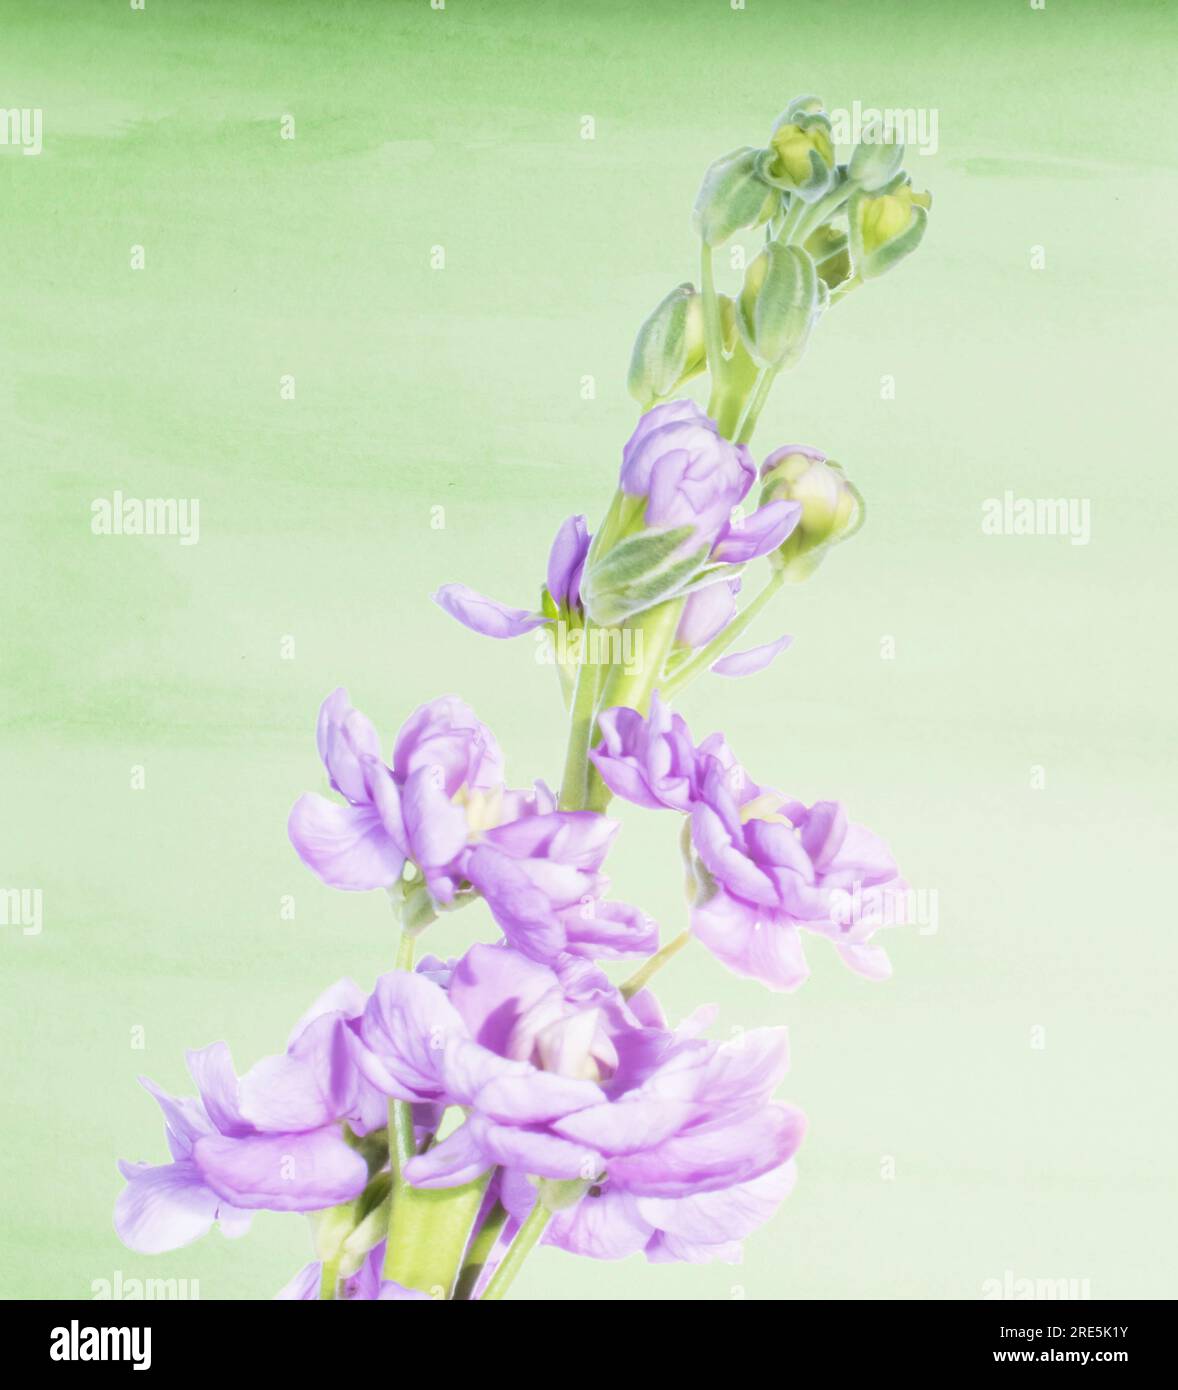 A high key delicate purple blooming flower on a pastel green texture background Stock Photo